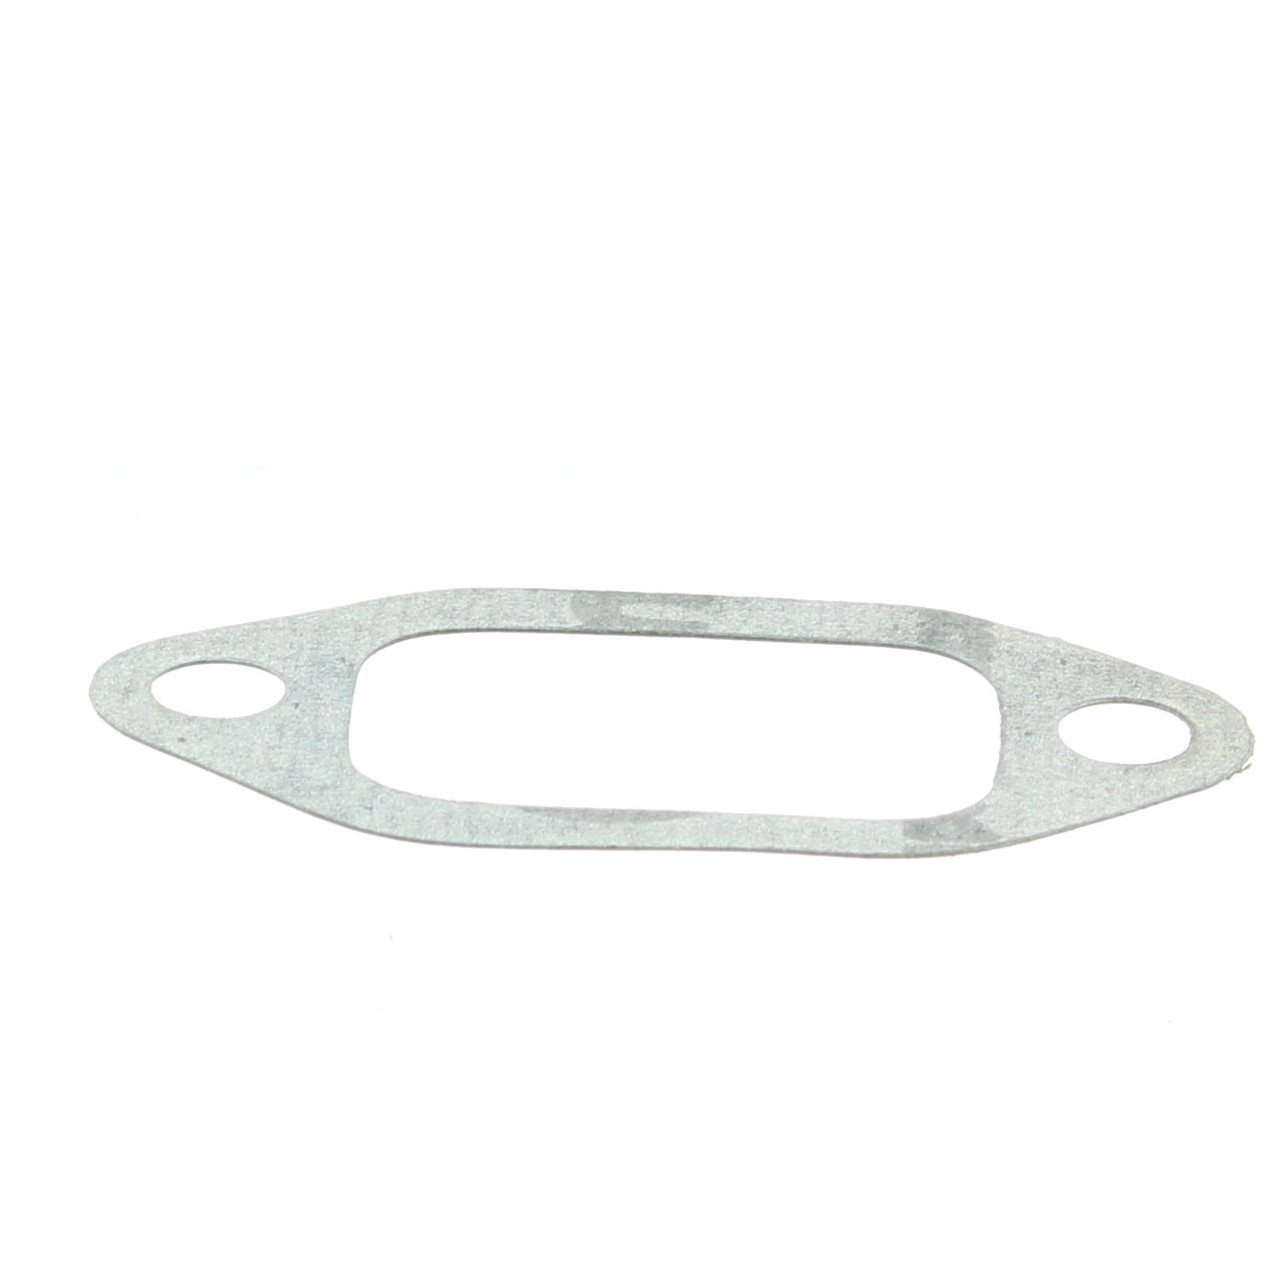 Johnson Evinrude OMC New OEM Shift Wire Cover Plate Gasket, 0308344